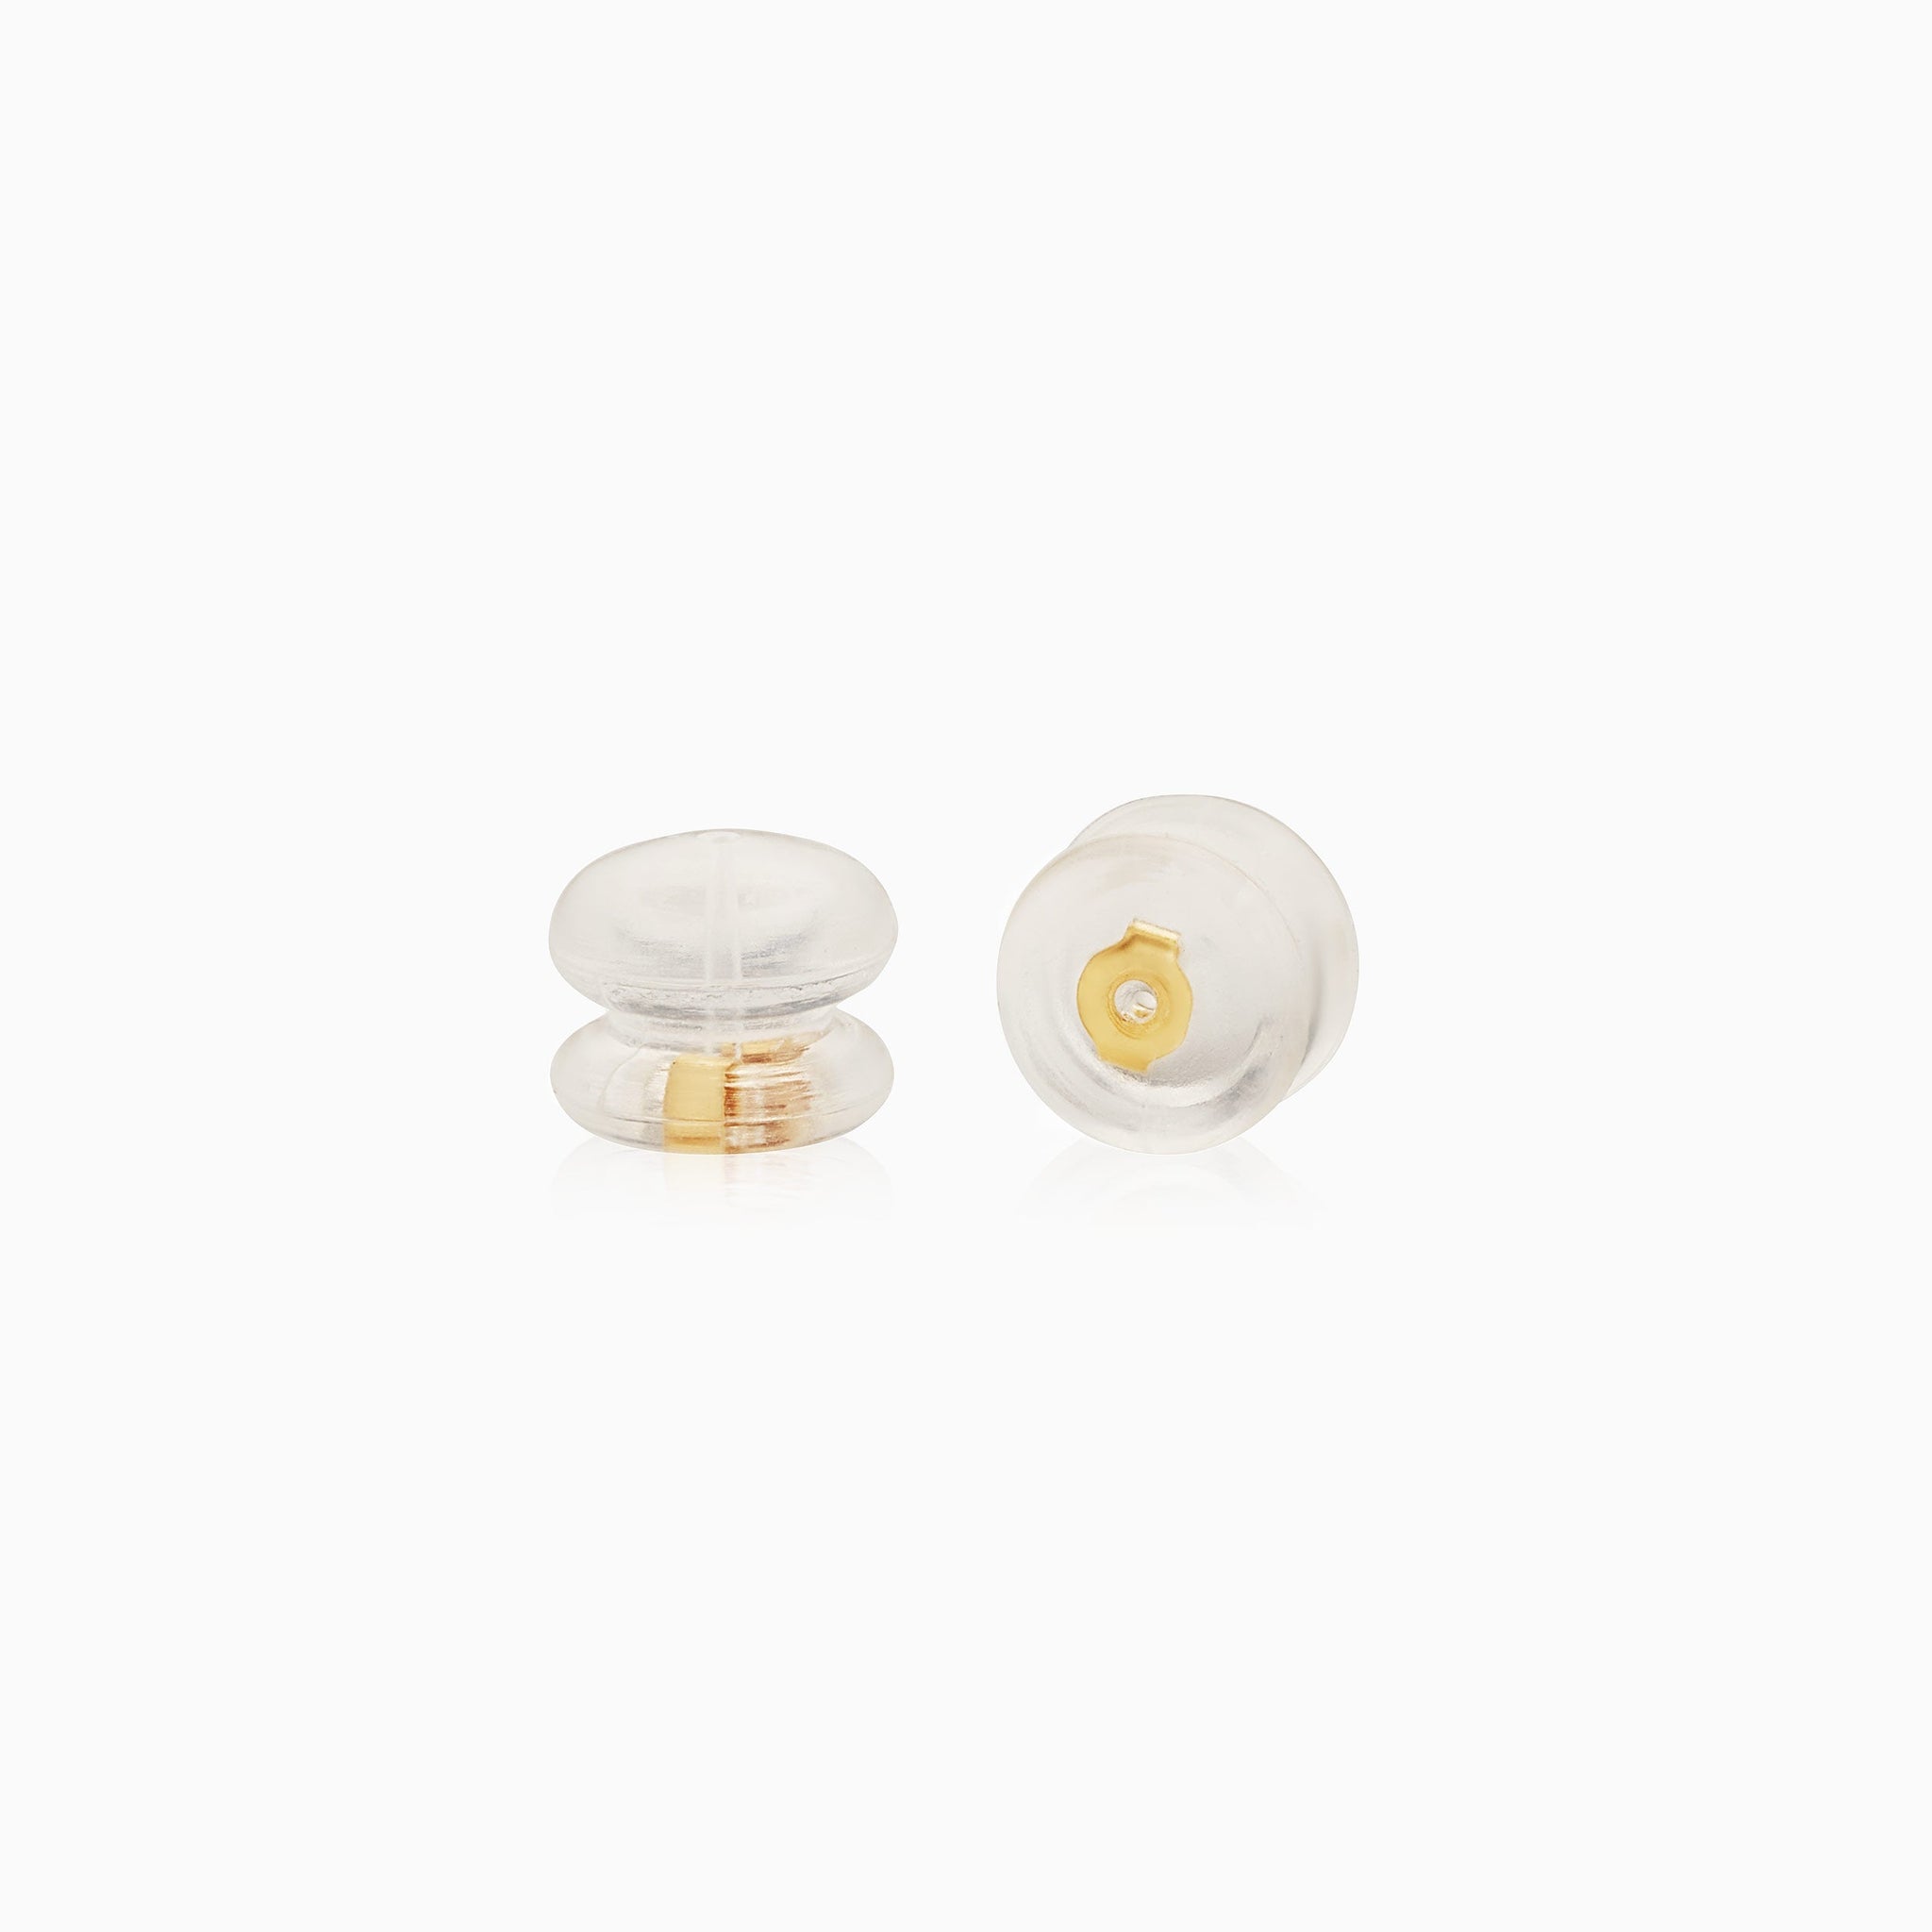 Earring Backings Guide: What are the best earrings backs to buy